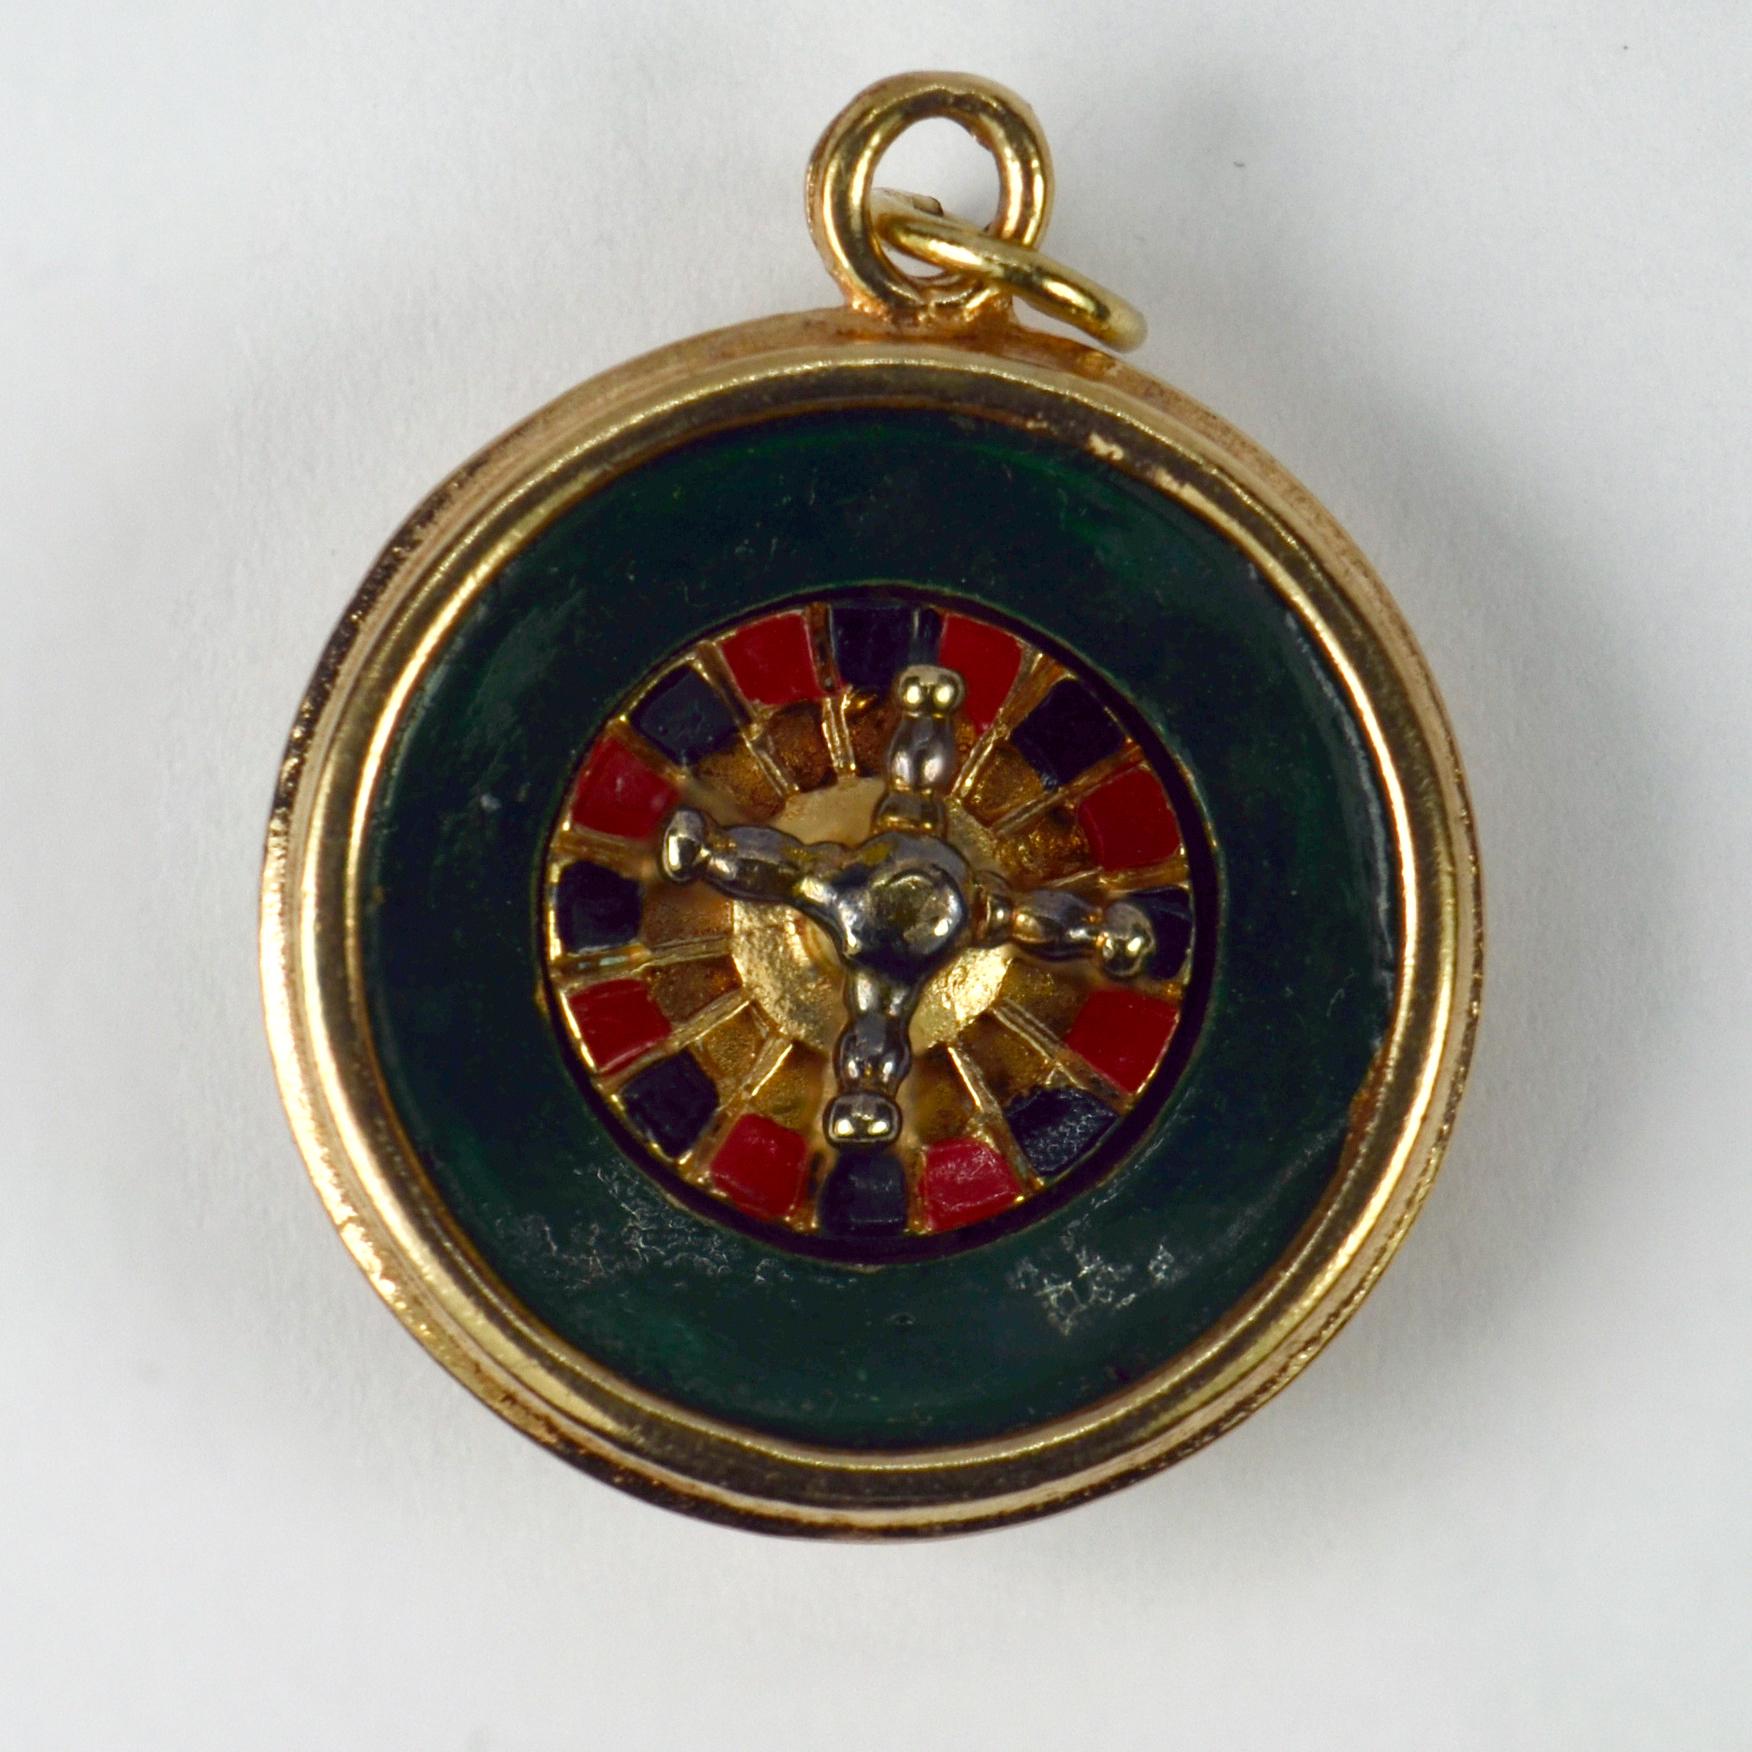 A 9 karat (9K) yellow gold charm pendant designed as a roulette wheel with spinning centrepiece and enamel wheel. Hallmarked for 9 karat gold, London, 1965 with makers marks IJL.

Dimensions: 2.5 x 2.1 x 0.8 cm (not including jump ring)
Weight: 7.92